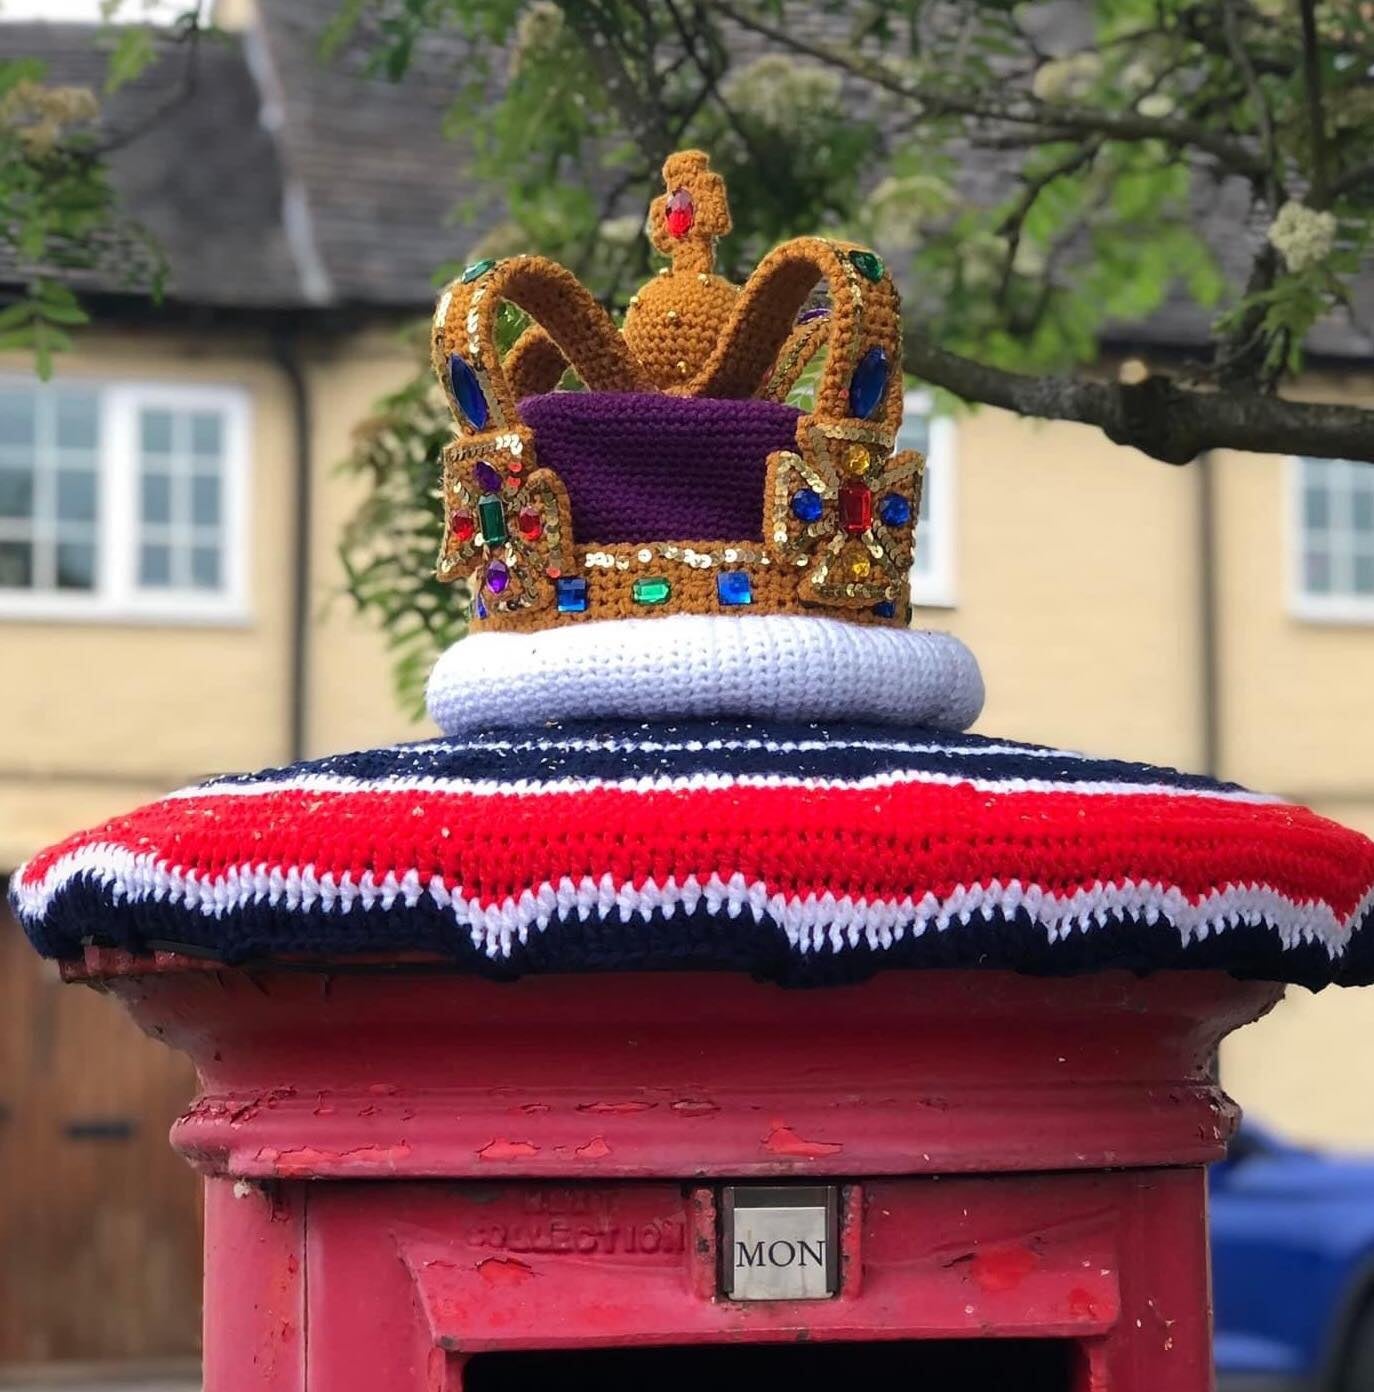 Leonie Edwards said the compliments from her village in Doveridge on her crochet work has been ‘lovely’ (Leonie Edwards/PA)